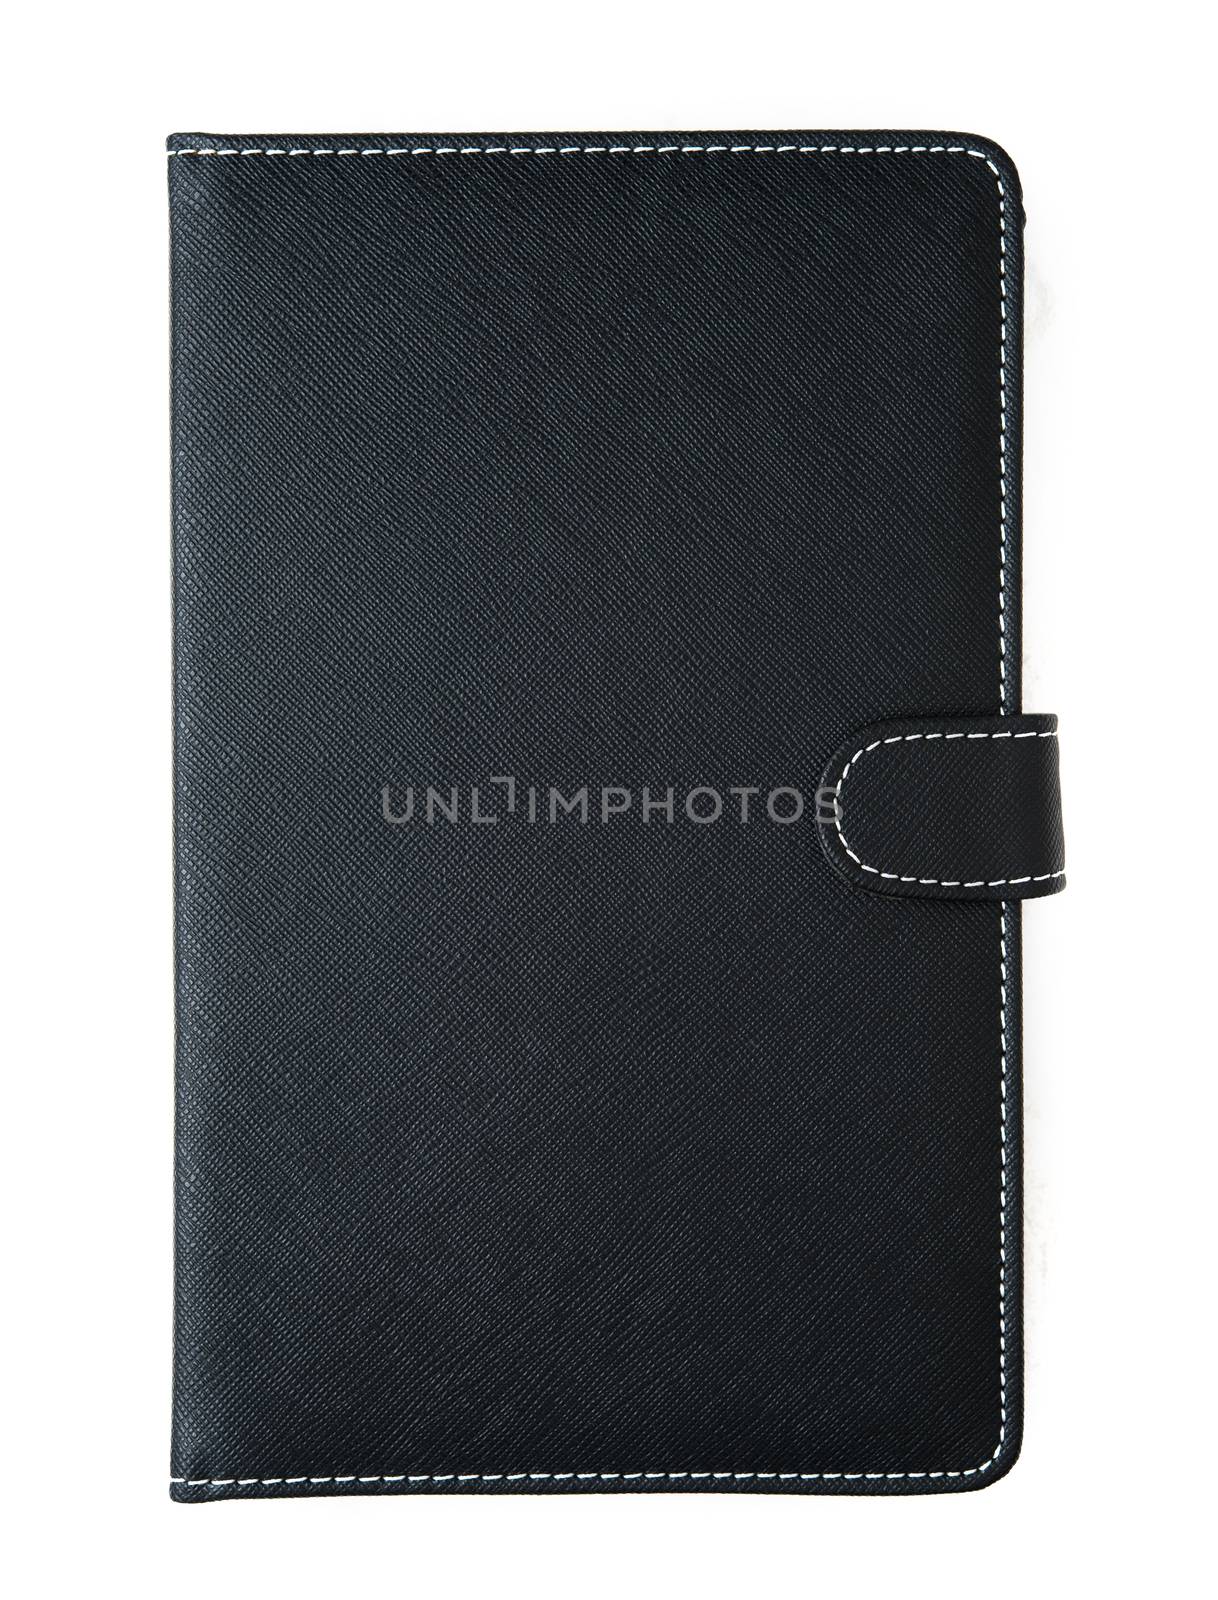 leather notebook front cover